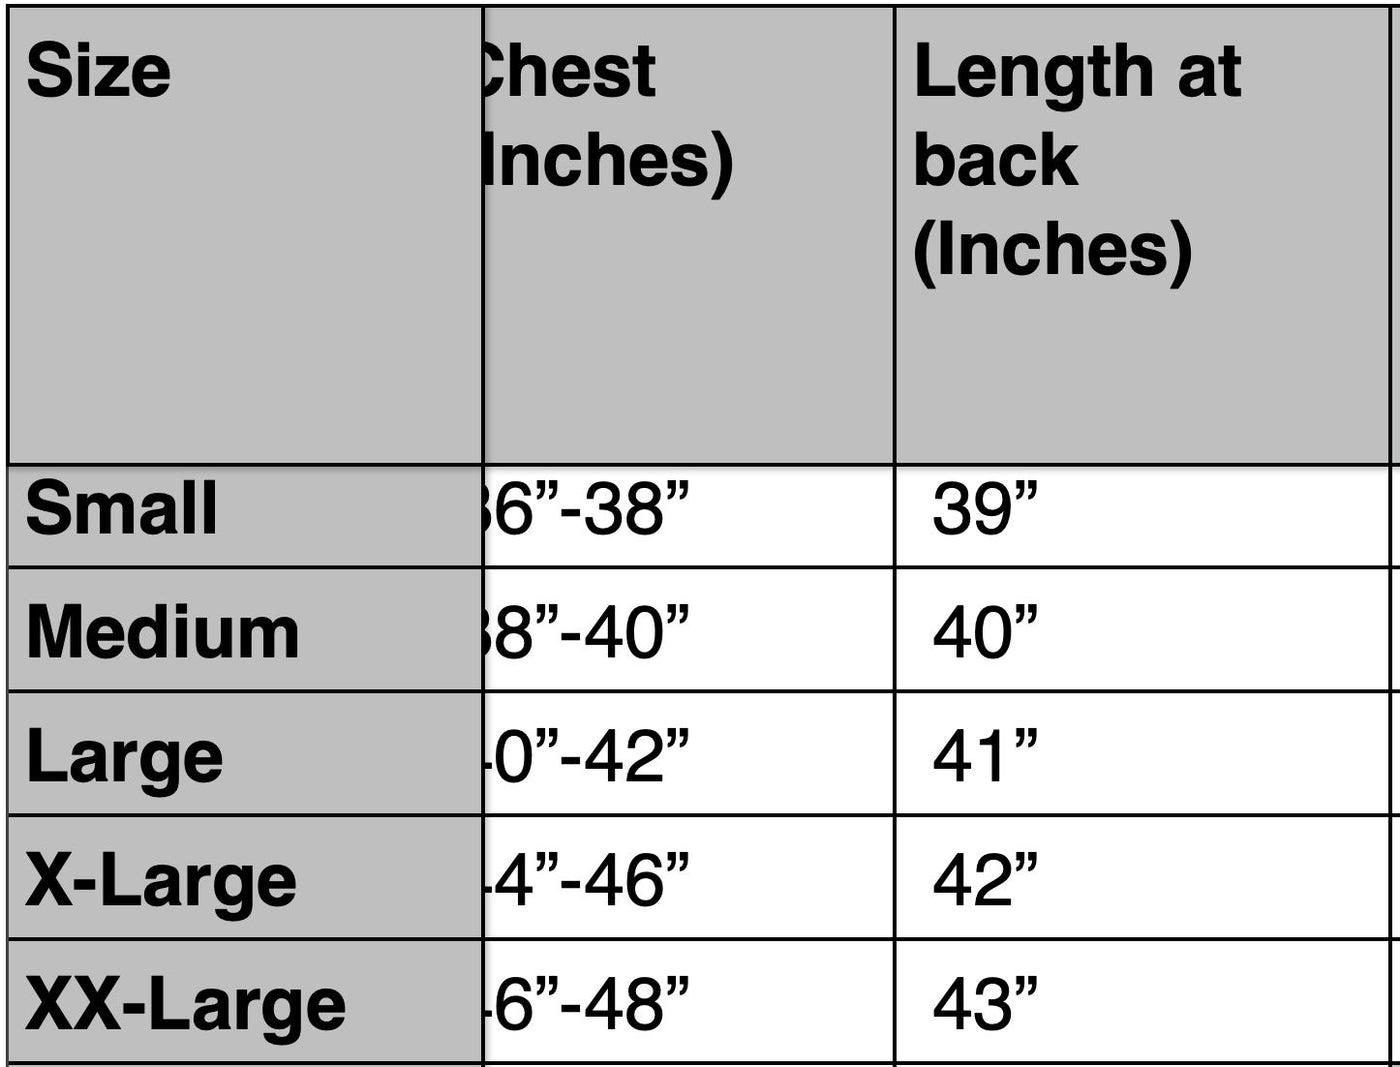 Spindle Mens Hooded Padded Long Puffer Coat Winter Longline Jacket